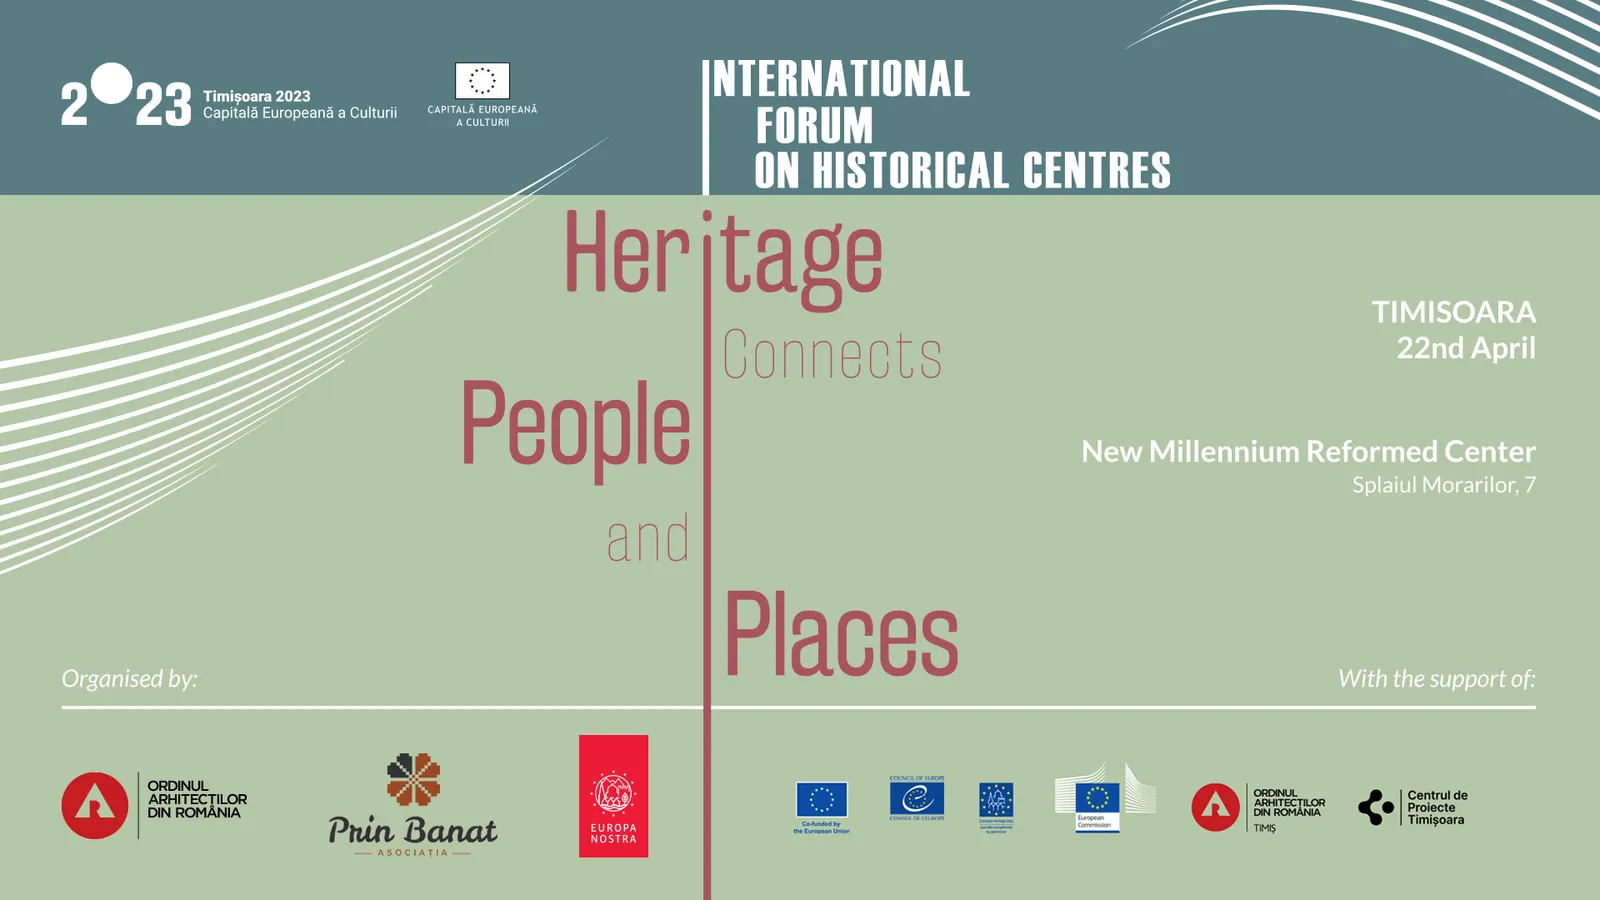 International Forum on Historical Centres: Heritage Connects People and Places